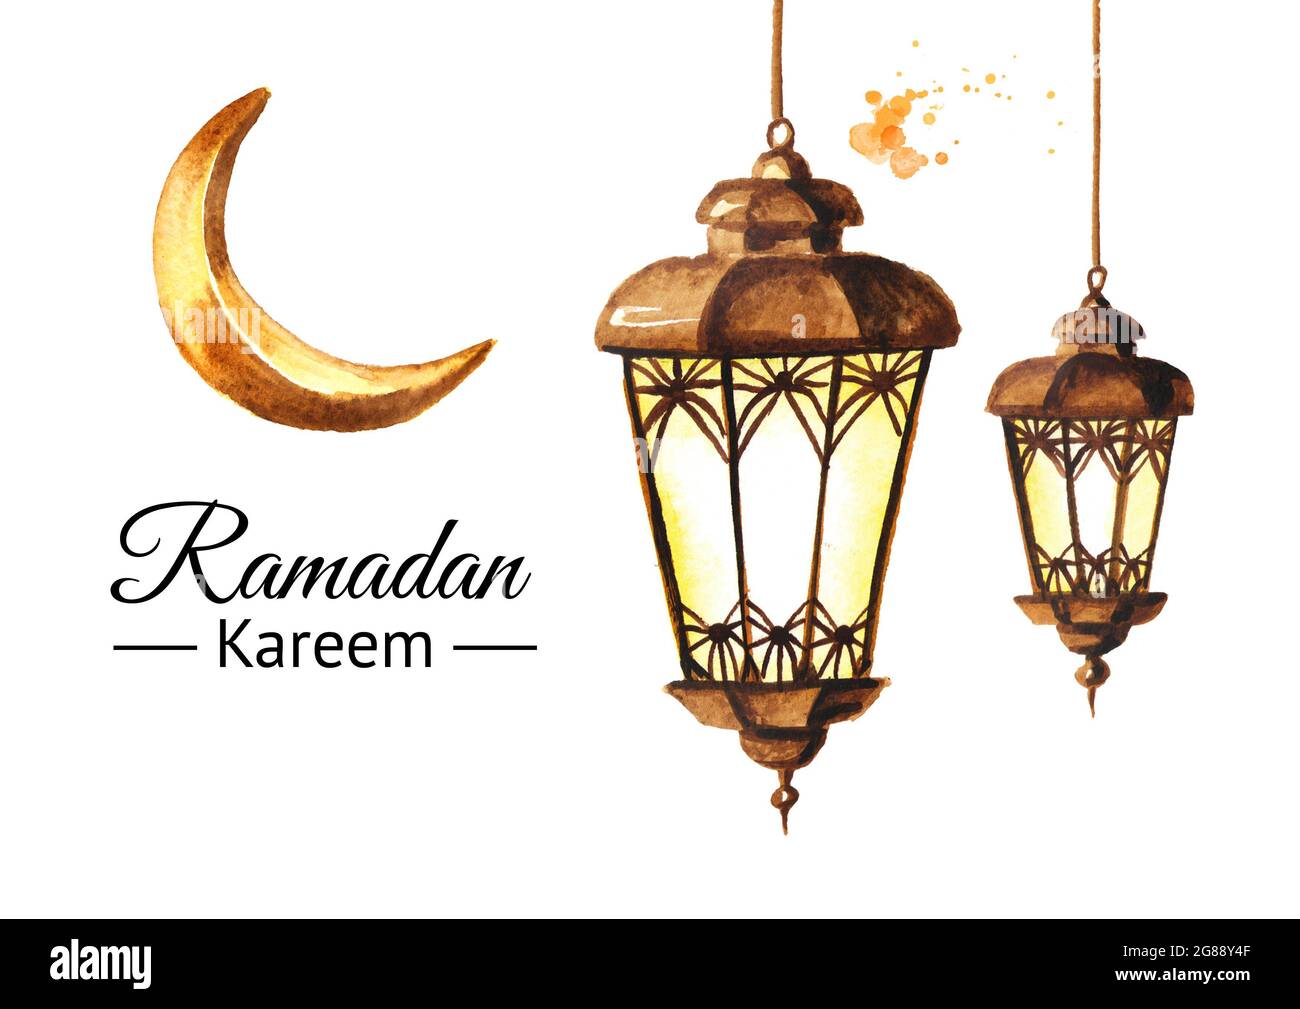 Ramadan Kareem greeting card with lanterns and Crescent. Watercolor hand drawn illustration, isolated on white background Stock Photo